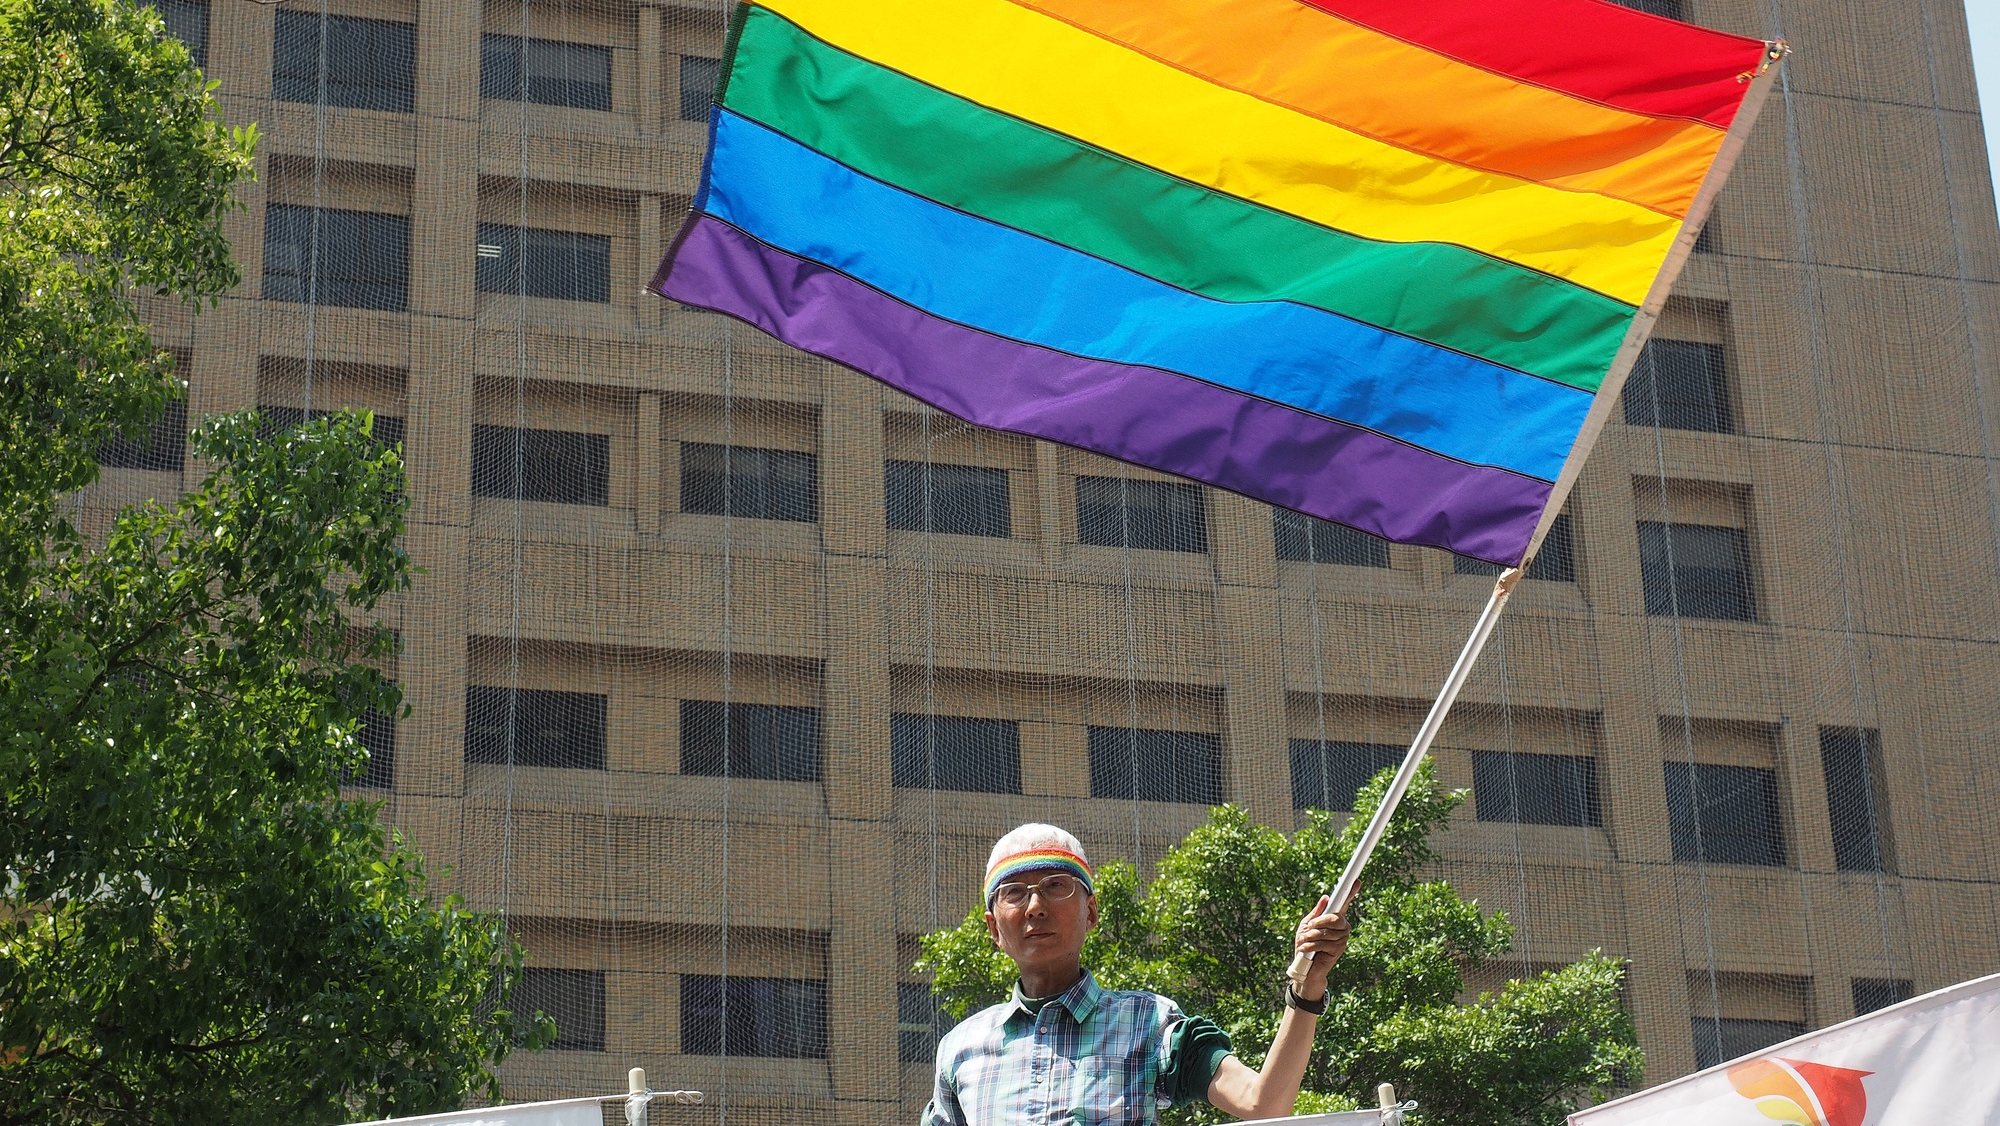 epa07586319 (FILE) - Taiwanese gay rights activist Chi Chia-wei waves a rainbow flag at a rally in Taipei, Taiwan, 23 April 2019 (issued on 20 May 2019). Taiwan&#039;s Interior Ministry said on 20 May 2019 that when Taiwan gay couples begin to register on 24 May 2019, Taiwanese can also register their union with foreign partners if the partners are from one of the 26 countries where gay marriaged is legalized. Taiwan Parliament on 17 May 2019 passed a bill to legalize gay marriage, granting them almost all the benefits of heterosexual couples. But the LGBT community claims that Tauwan homosexuals should enjoy all the rights of heterosexuals, including the right to adopt children and to marry a person from any foreign country.  EPA/DAVID CHANG